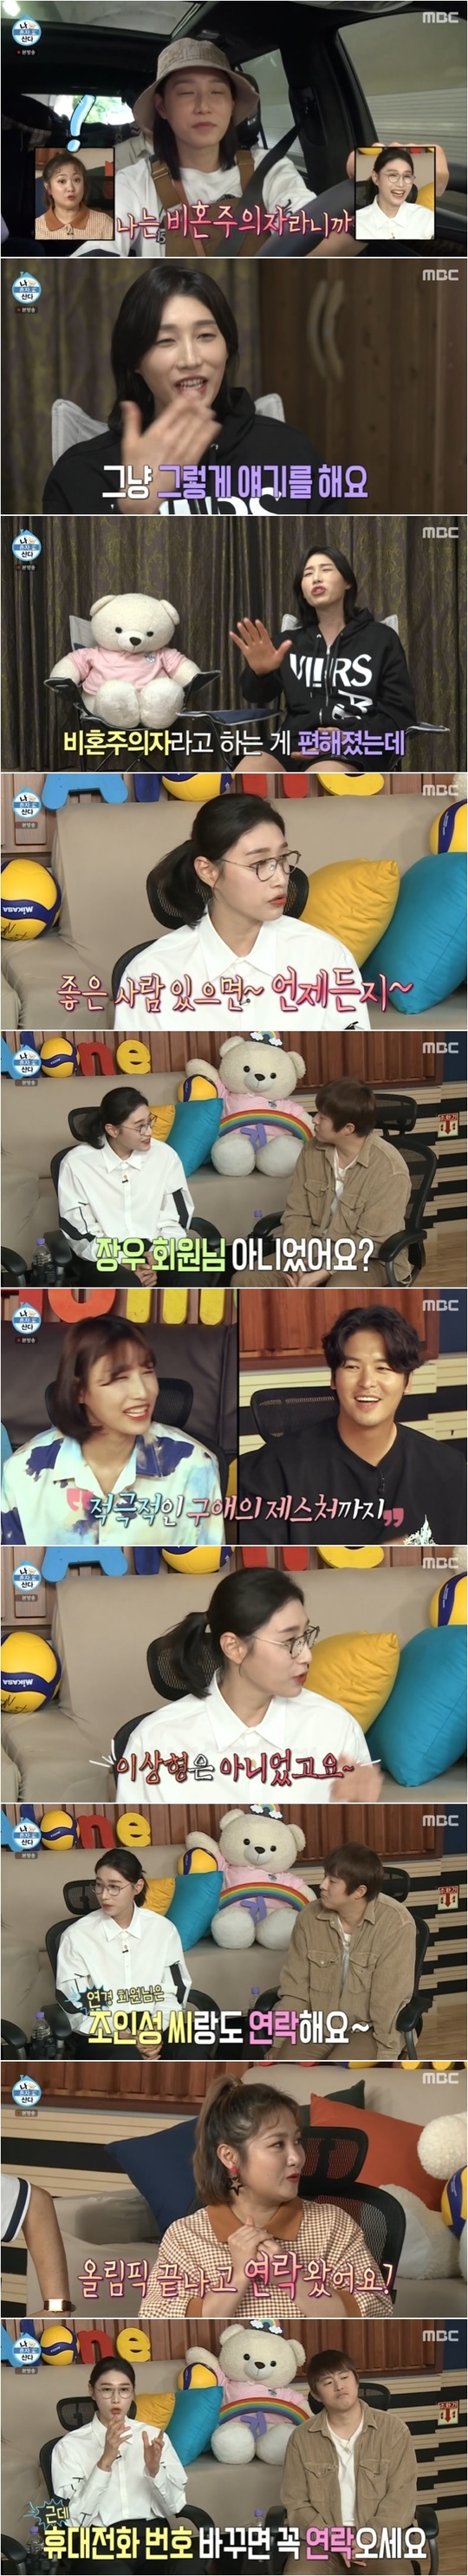 Kim Yeon-koung confesses he is not a non-marriedMBC I Live Alone broadcast on September 10, Kim Yeon-koung, Kim Soo-ji, Yang Hyo-jin and Kim Hee-jin went camping together.Kim Hee-jins popularity was on the topic of the day.Kim Yeon-koung said, One of the four handsome Olympic athletes is Kim Hee-jin. Kim Yeon-koung said, I saw Yang Hyo-jin and Jincheon athletes in the village and said, Is not it good-looking?Kim Yeon-koung was asked, Are you a non-married person? He said, I just talk about it. I have a lot of age, so I asked him, Do not marry.He then left the possibility open, anytime you have a good person.Isnt Lee Jang-woo an ideal type? said Kim Yeon-koung, not an ideal type; the feeling was good; the chemistry was good.I had met Lee Jang-woo through I Live Alone in the past. I recently saw Lee Jang-woo succeed in dieting.Im learning now, he said, laughing.